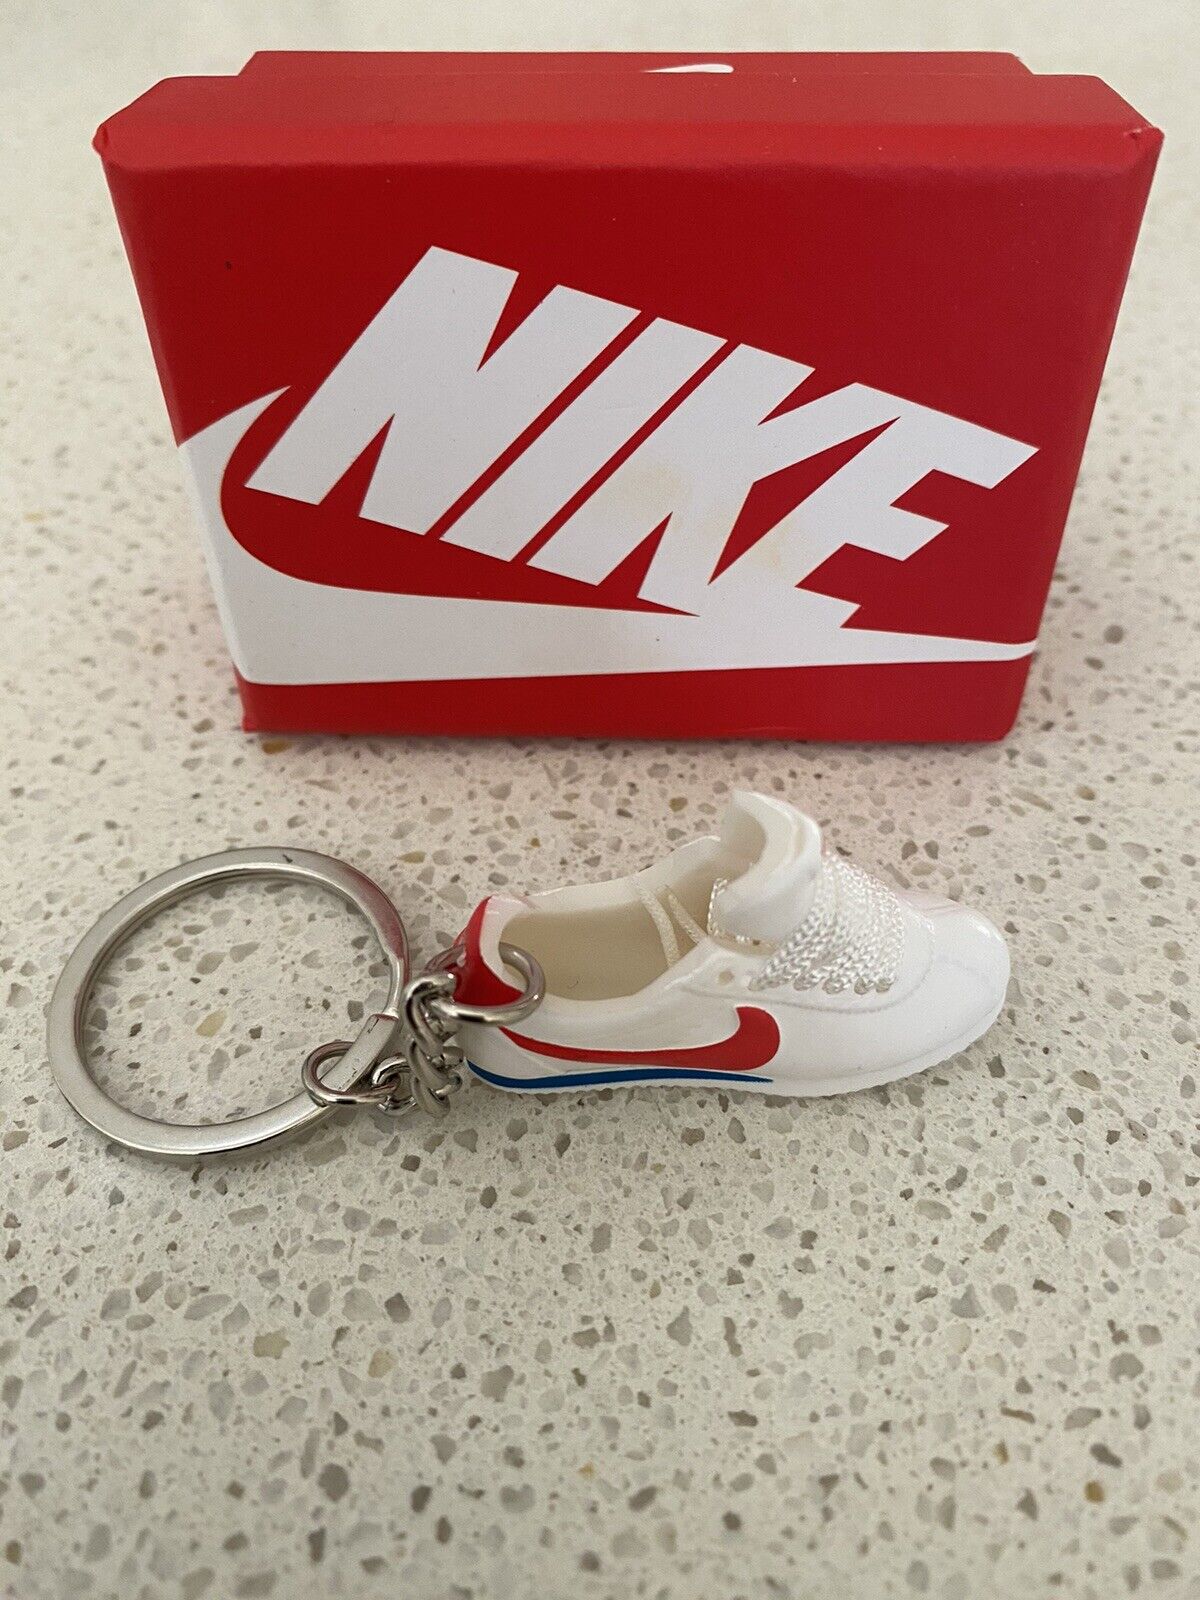 NIKE CLASSIC CORTEZ-(FORREST GUMP)-3D SNEAKER KEYCHAIN WITH BOX